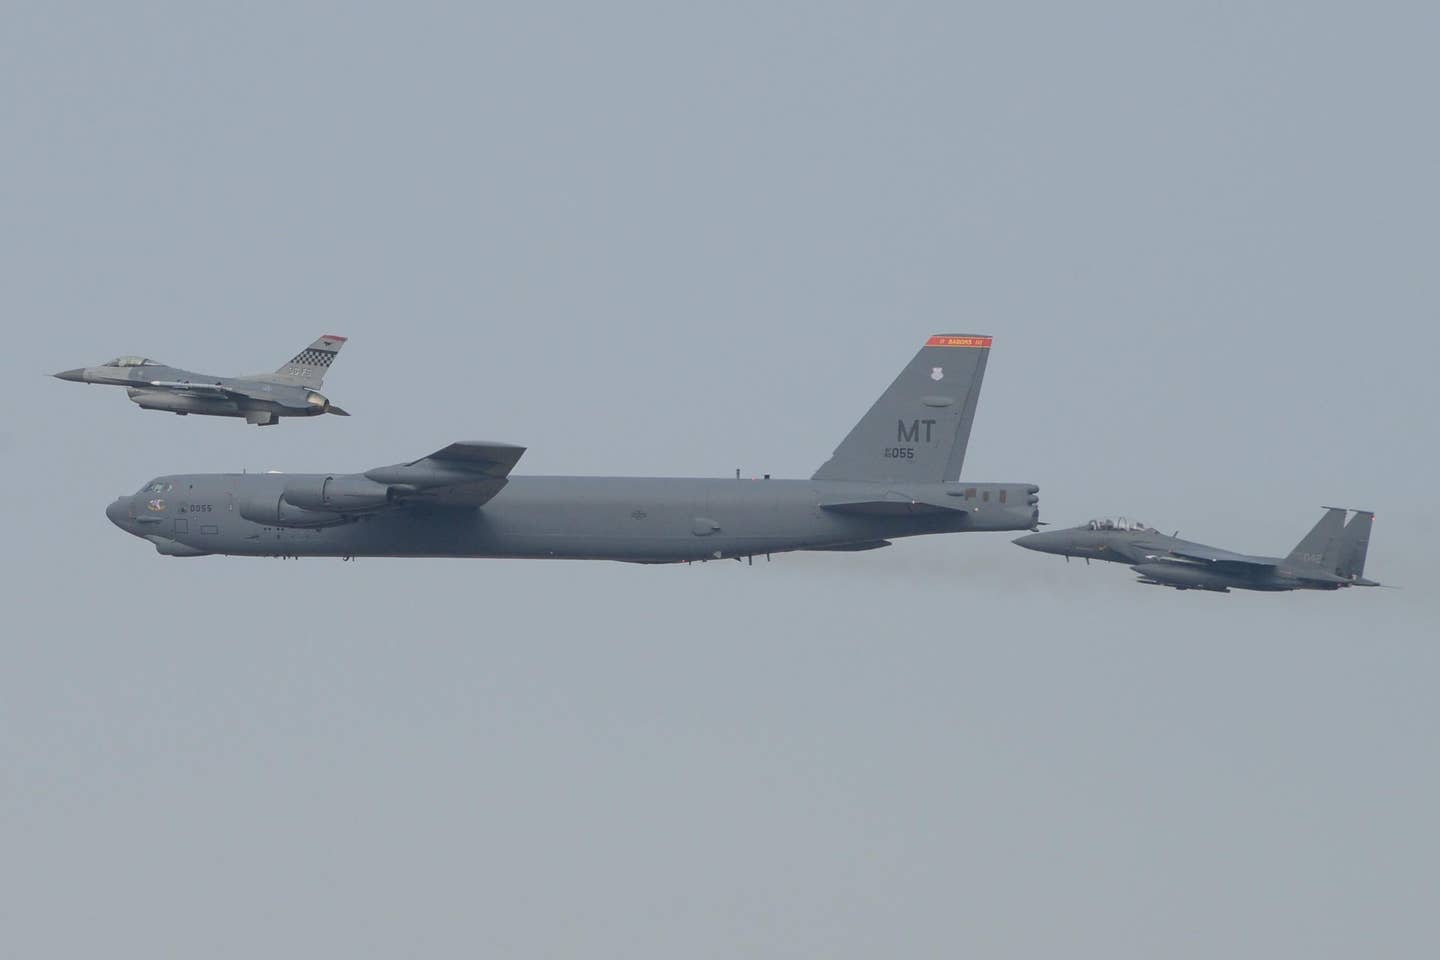 A U.S. Air Force B-52H strategic bomber from Andersen Air Base, Guam, conducts a low-level flight in the vicinity of Osan, South Korea, in response to provocative actions by North Korea, in 2016. The B-52 was joined by a South Korean F-15K Slam Eagle and a U.S. Air Force F-16. <em>U.S. Air Force photo by Airman 1st Class Dillian Bamman/Released</em>